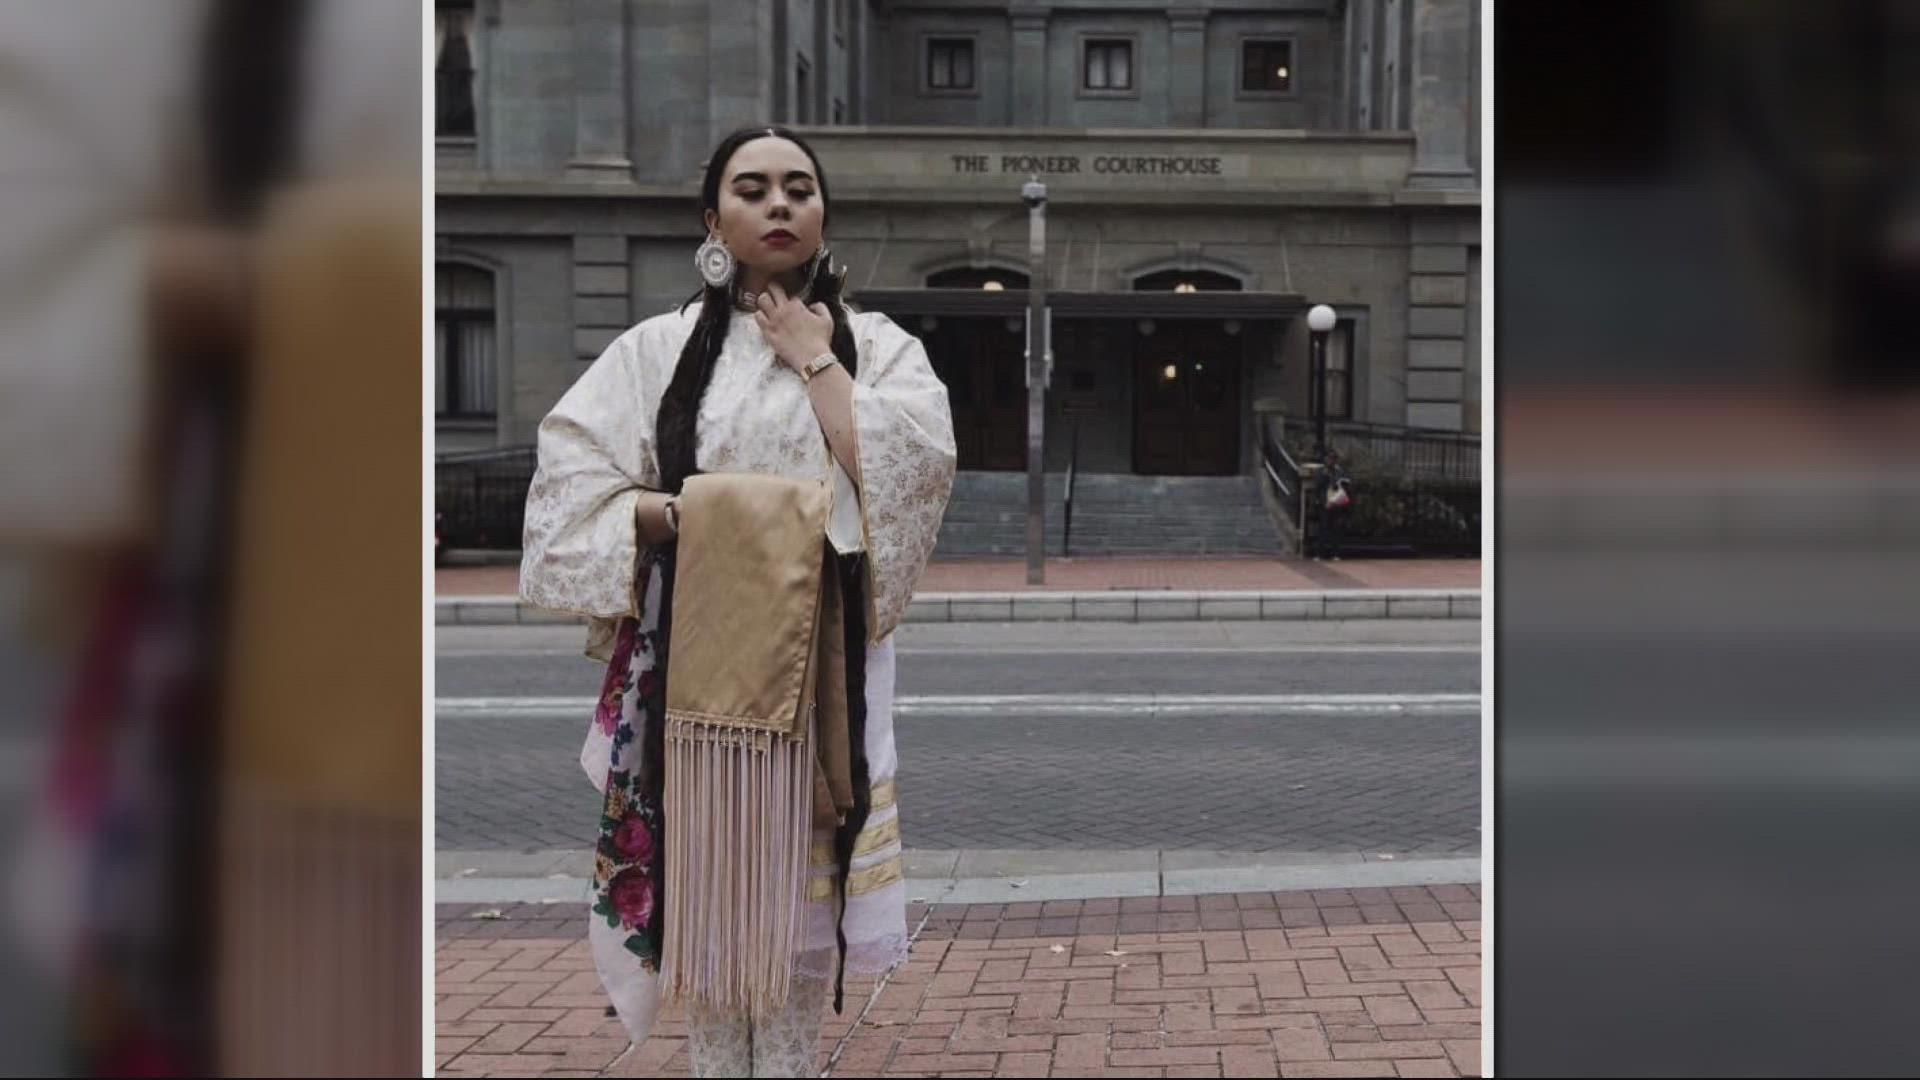 A member of the Confederate Tribes of Grand Ronde had her Native regalia stolen in Salem. She says she's heartbroken and is pleading for it to be returned.